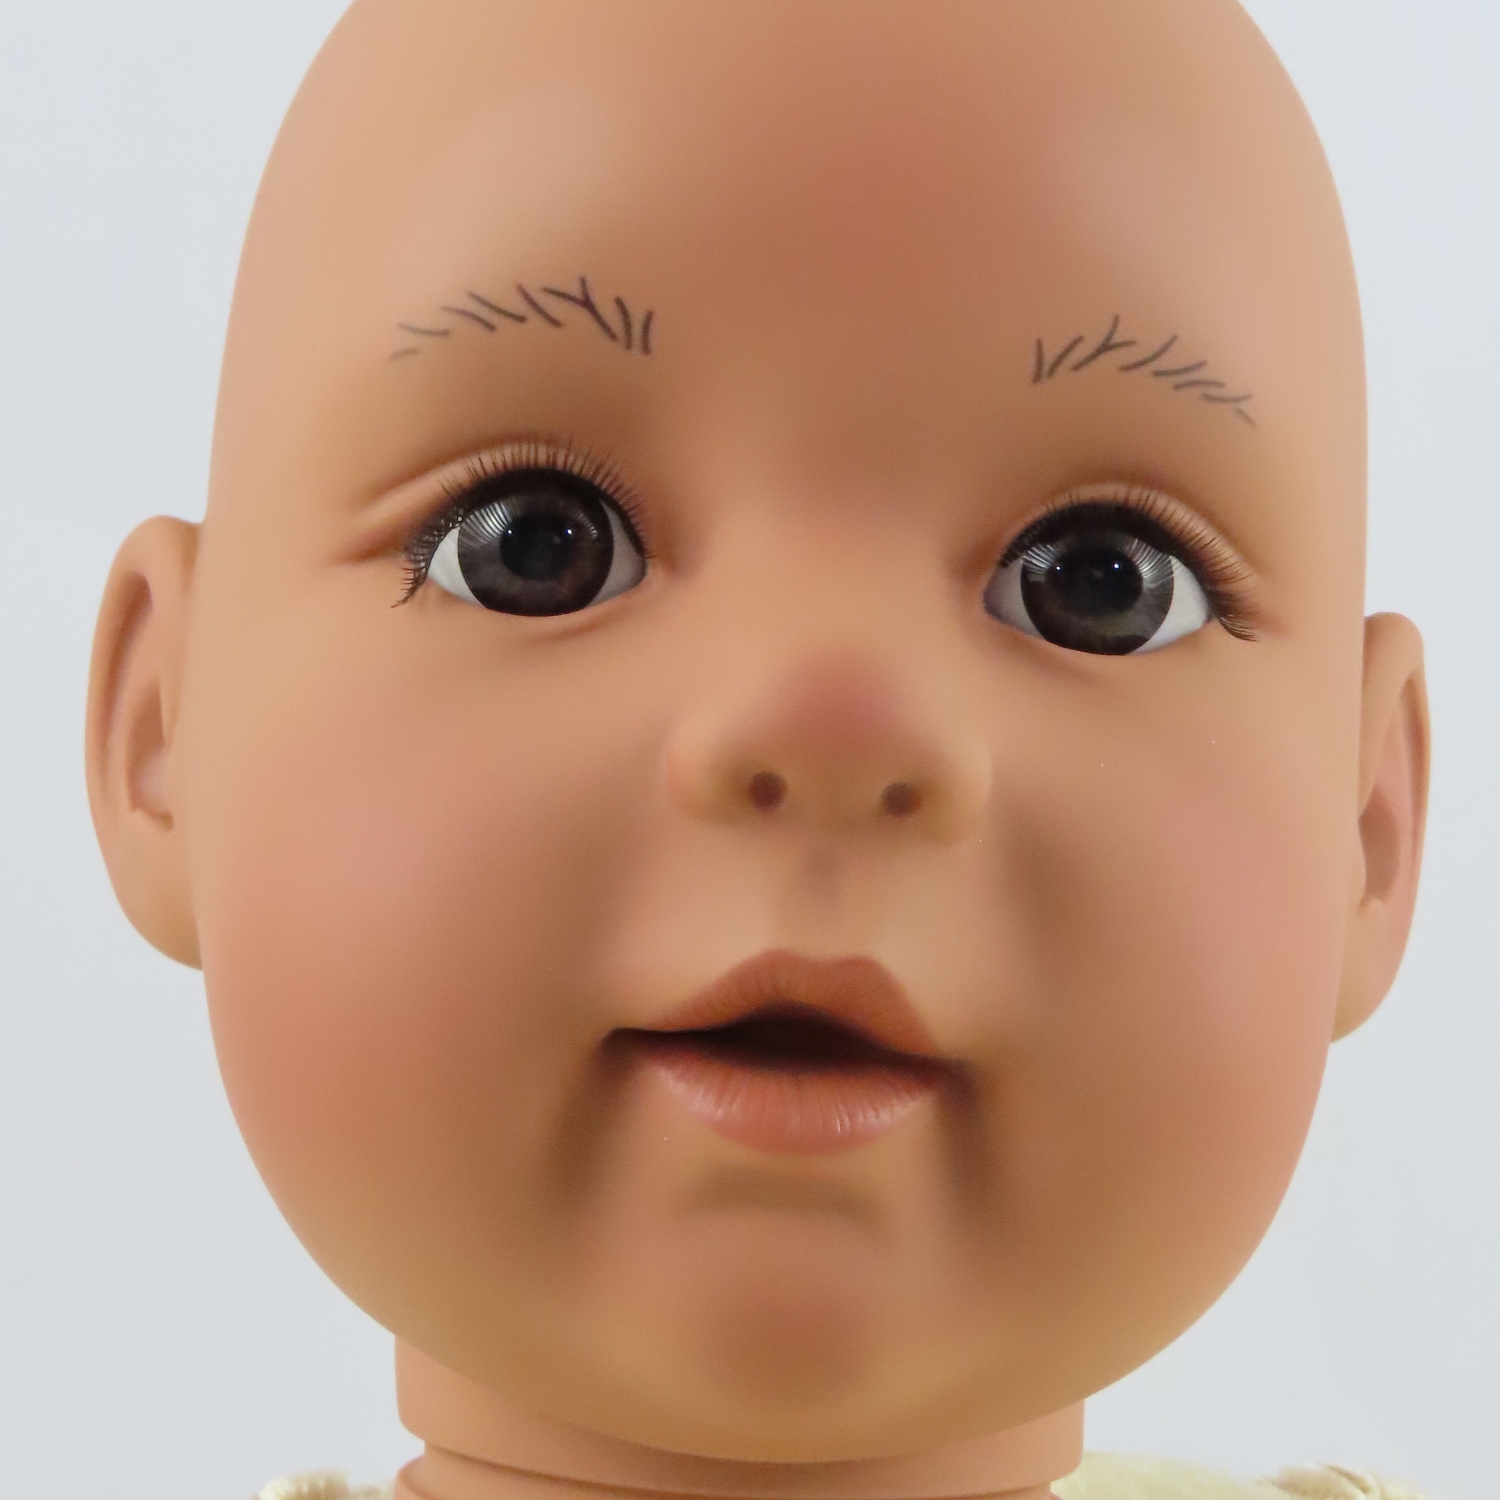 Joanna Doll Kit for Creating Toddler and Baby Dolls That Look Real